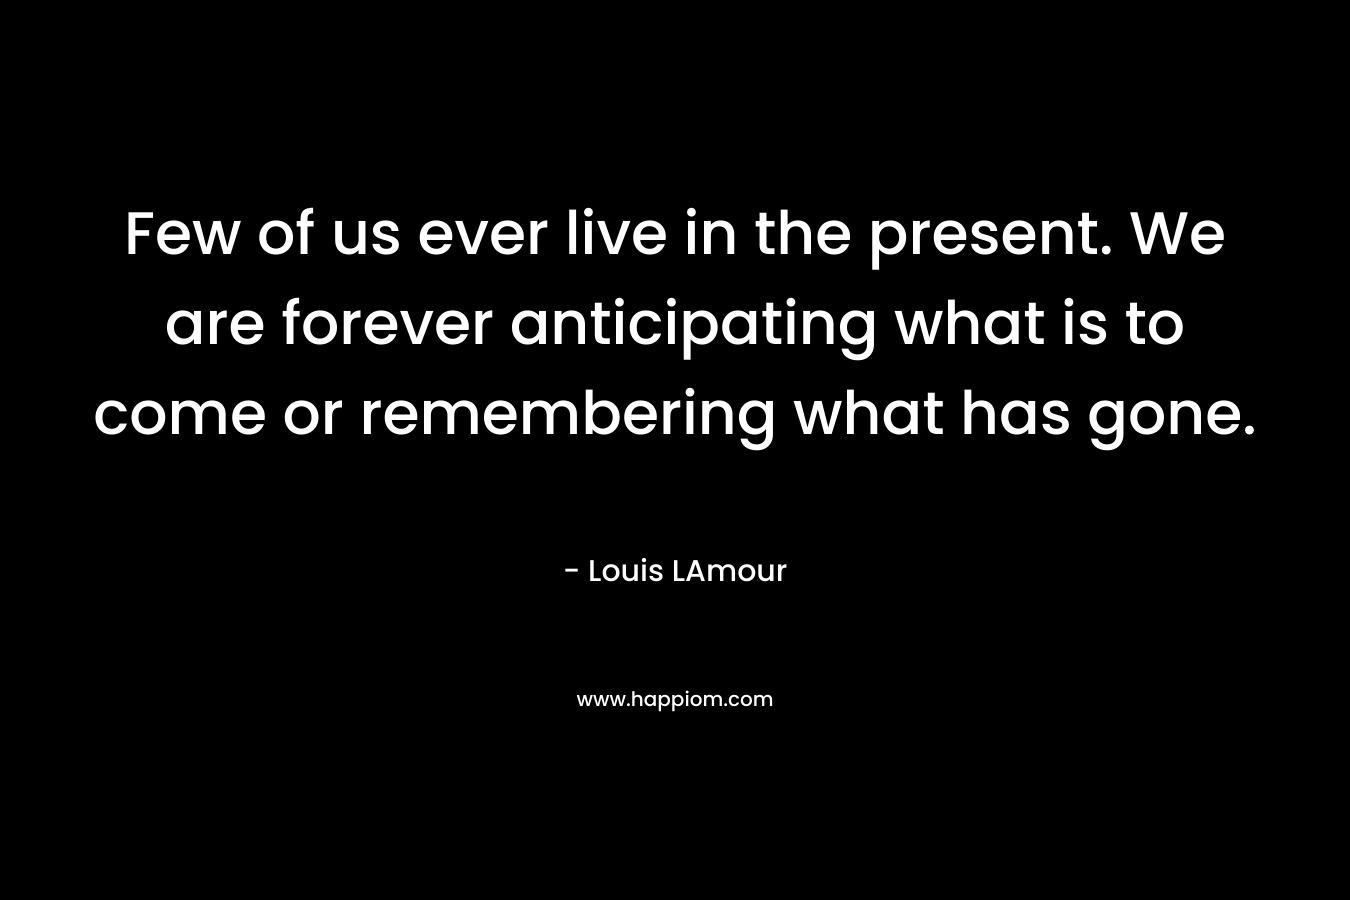 Few of us ever live in the present. We are forever anticipating what is to come or remembering what has gone. – Louis LAmour